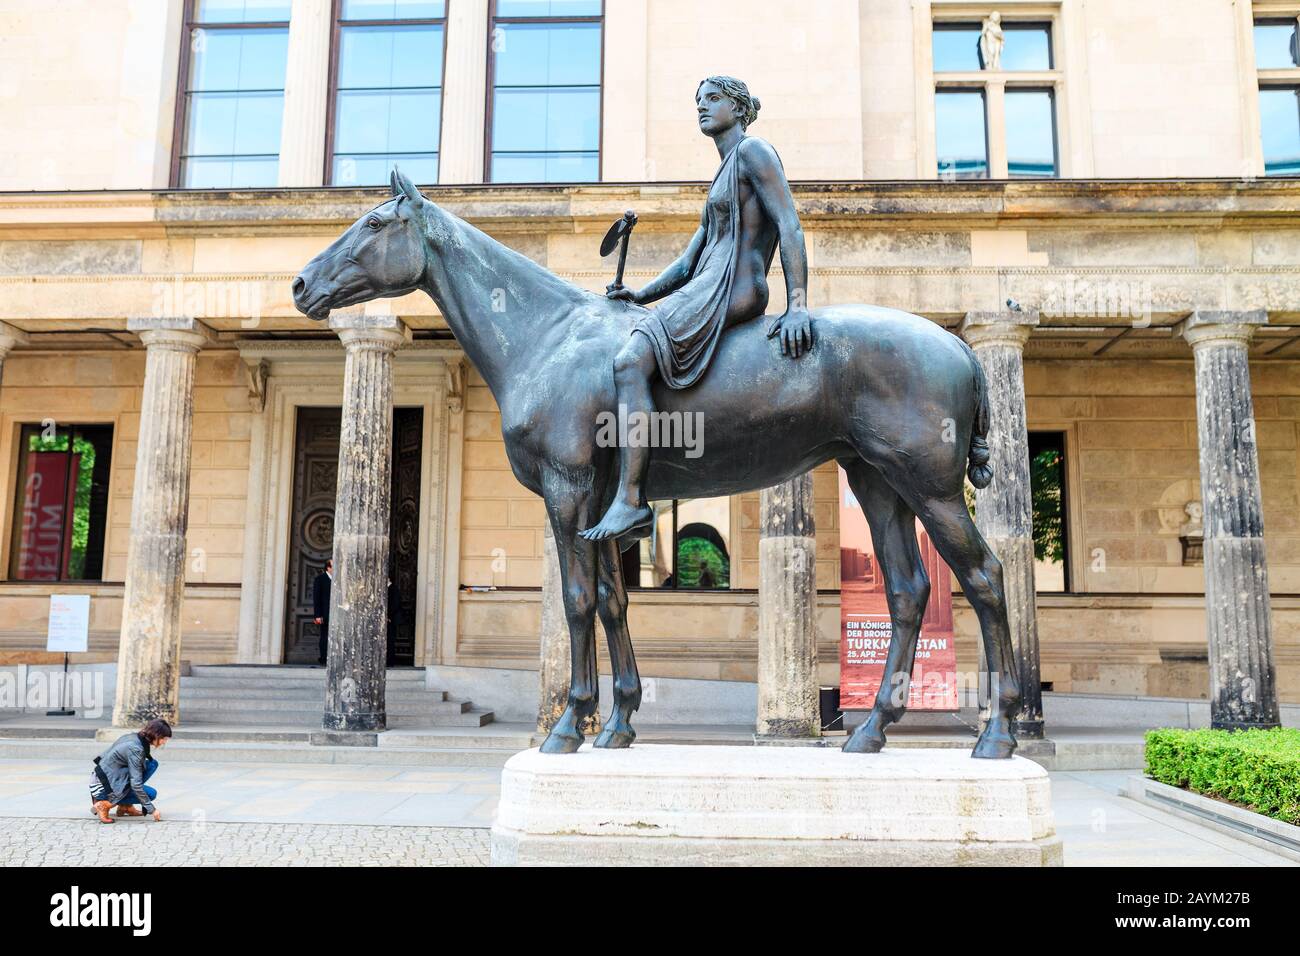 17 MAY 2018, BERLIN, GERMANY: The bronze sculpture of Amazon woman on horse  in the Museum Island Stock Photo - Alamy